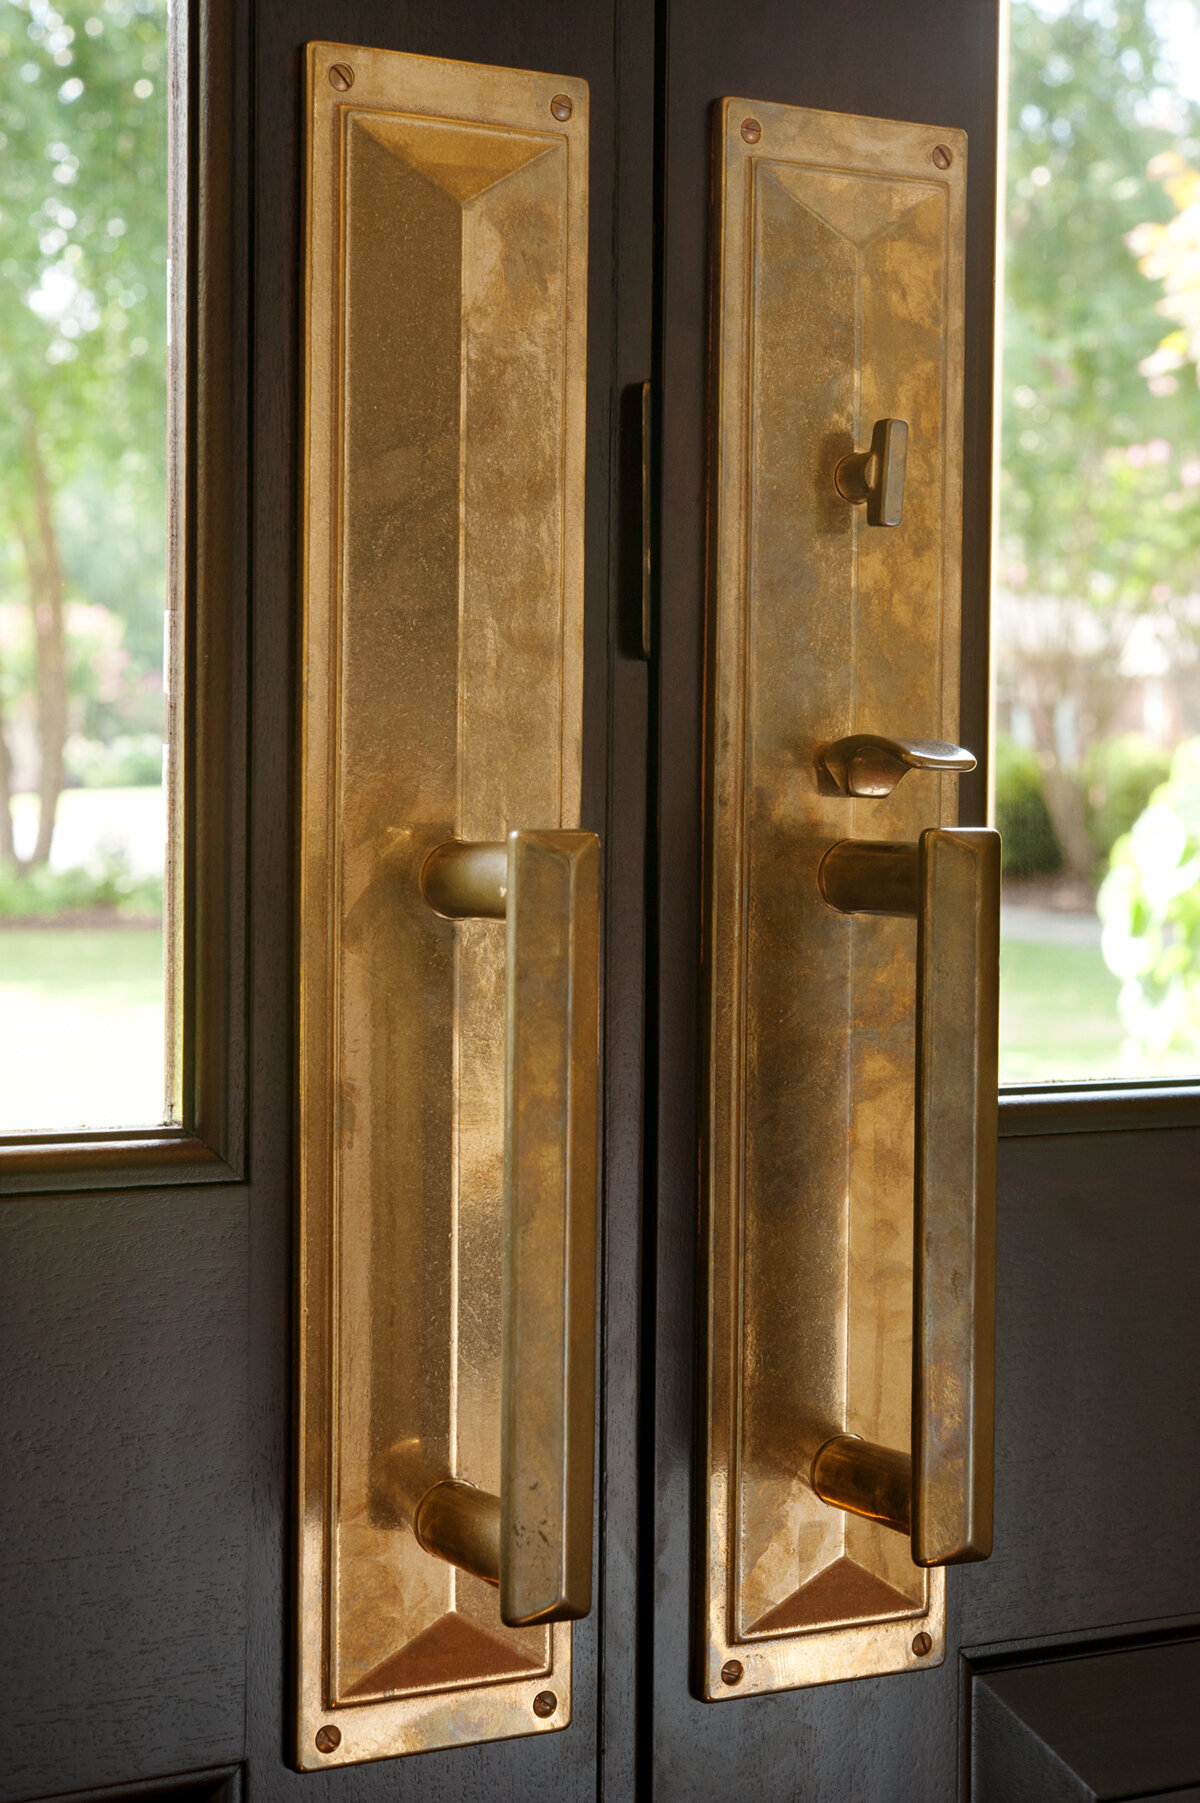 Panageries Residential Interior Design | Transitional Suburban Haven Front Door Details